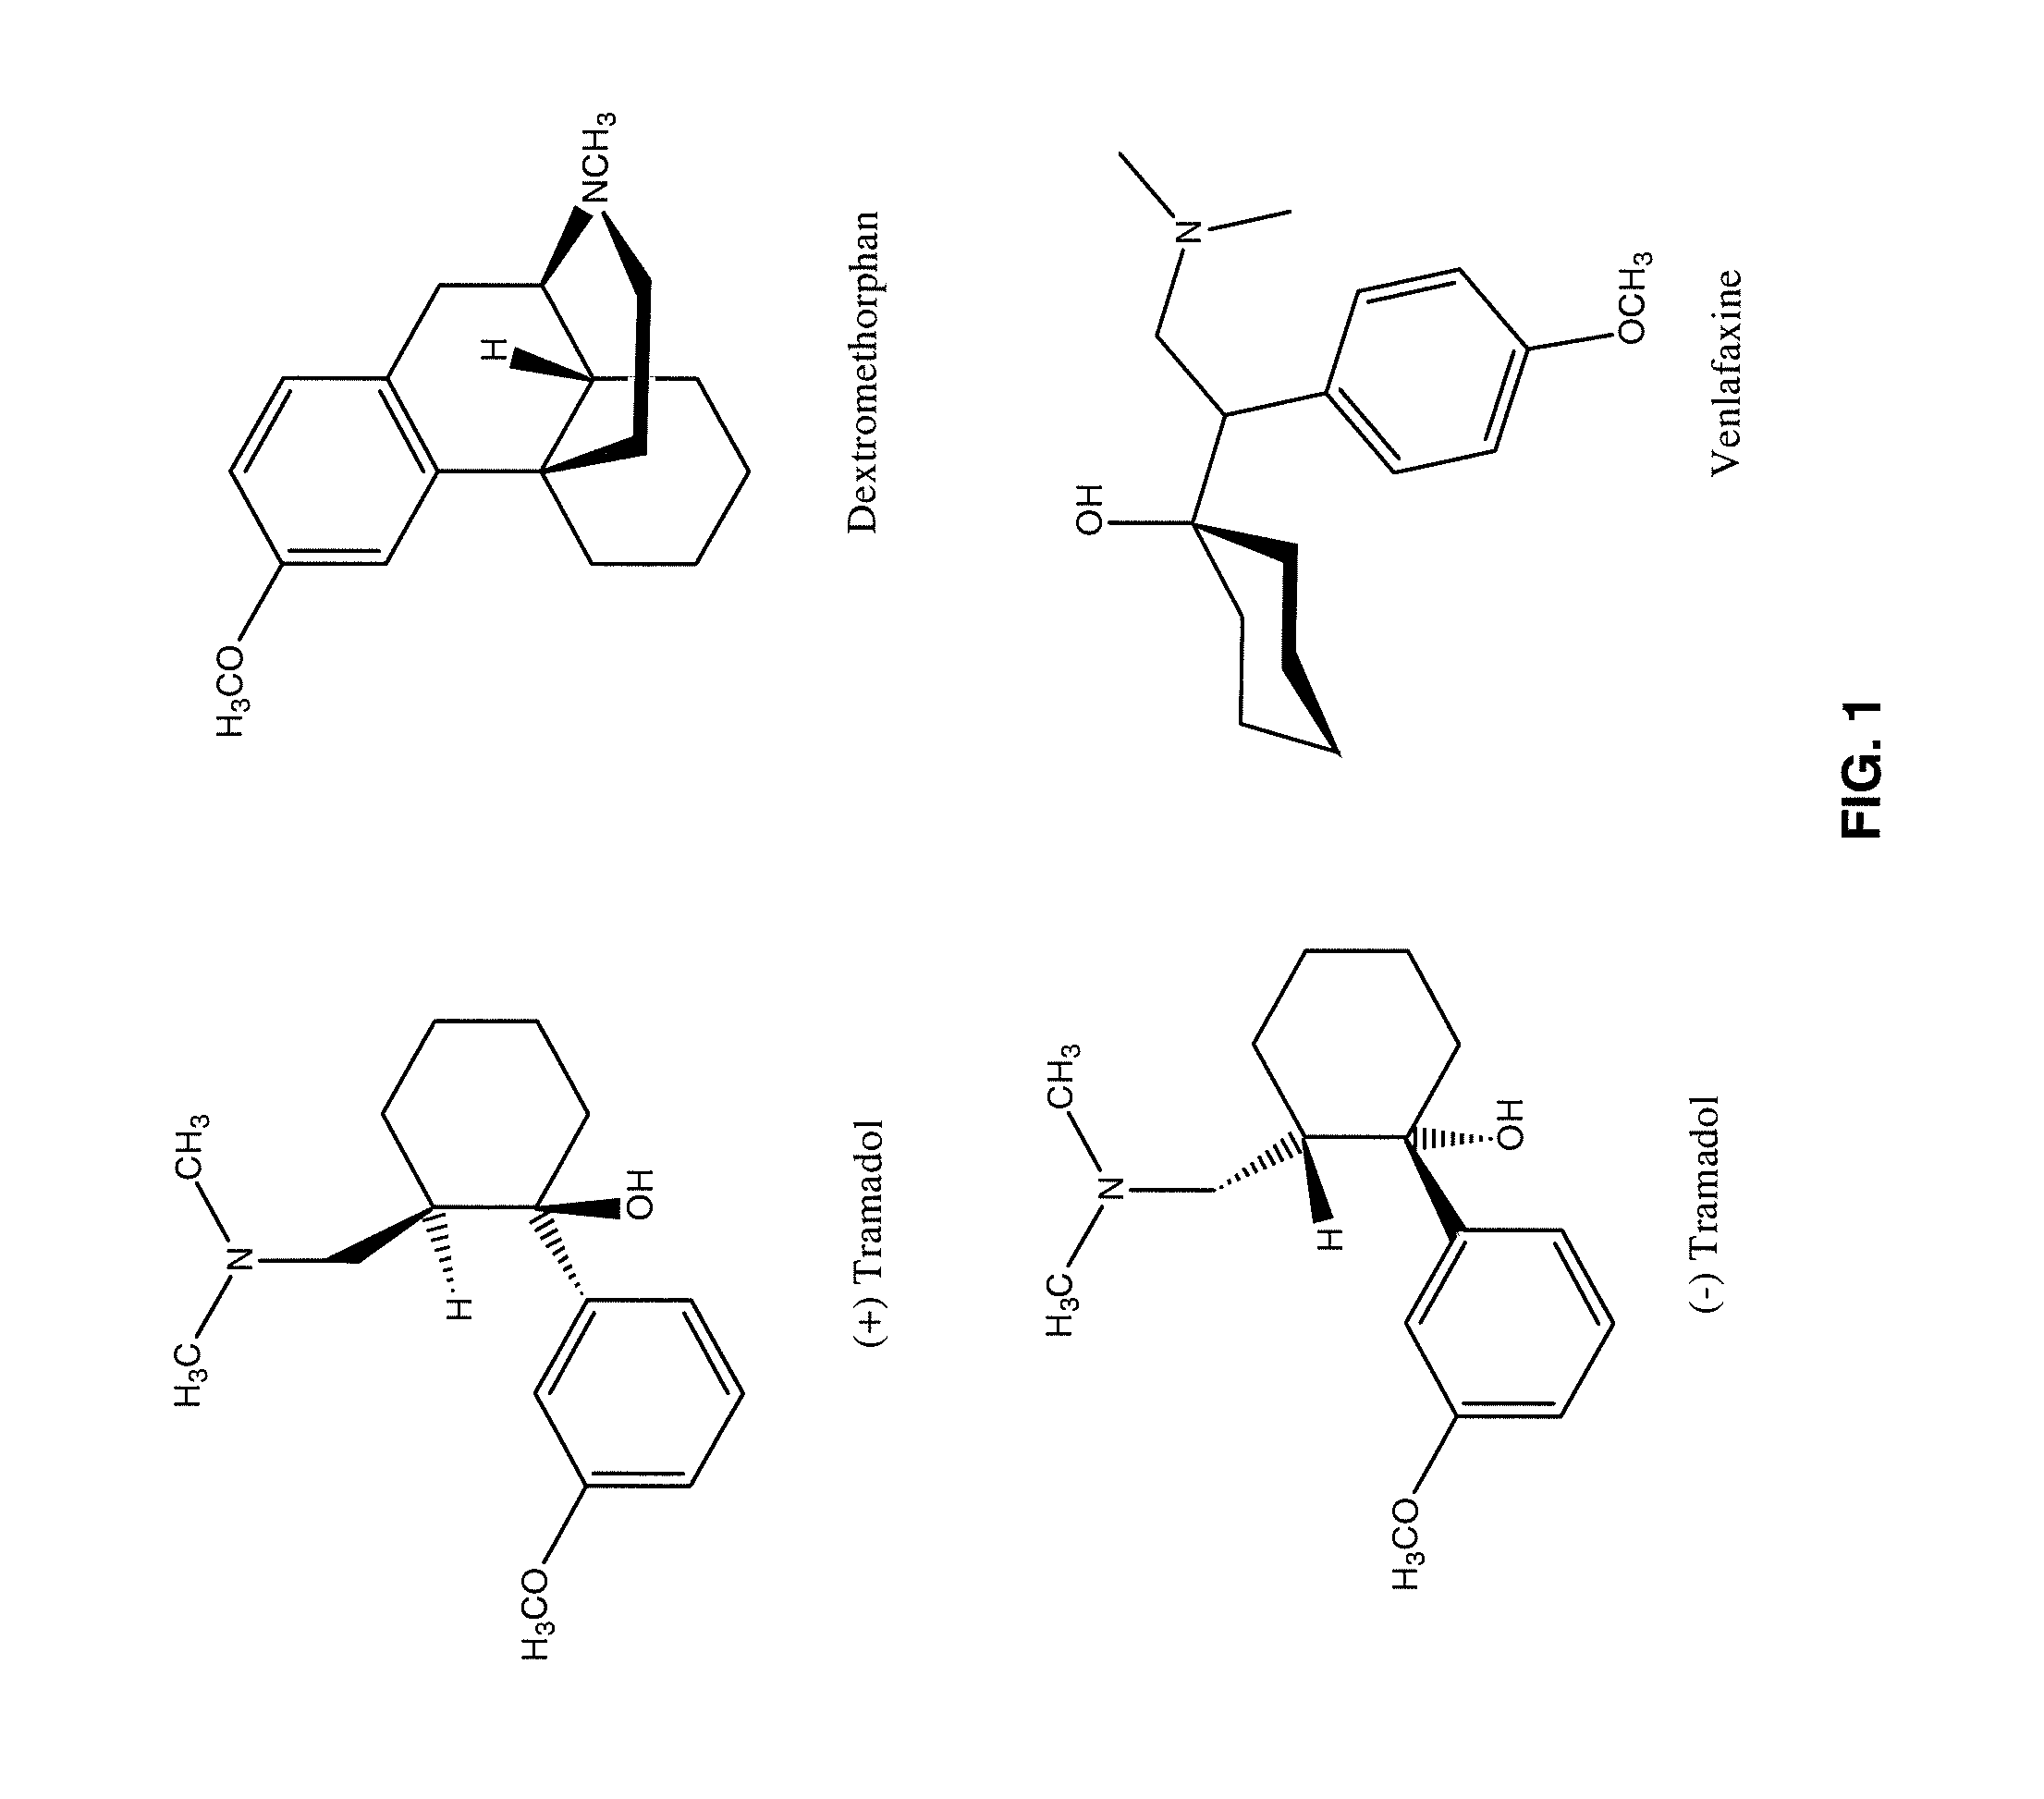 Novel Pharmaceutical Compositions for Treating Chronic Pain and Pain Associated with Neuropathy